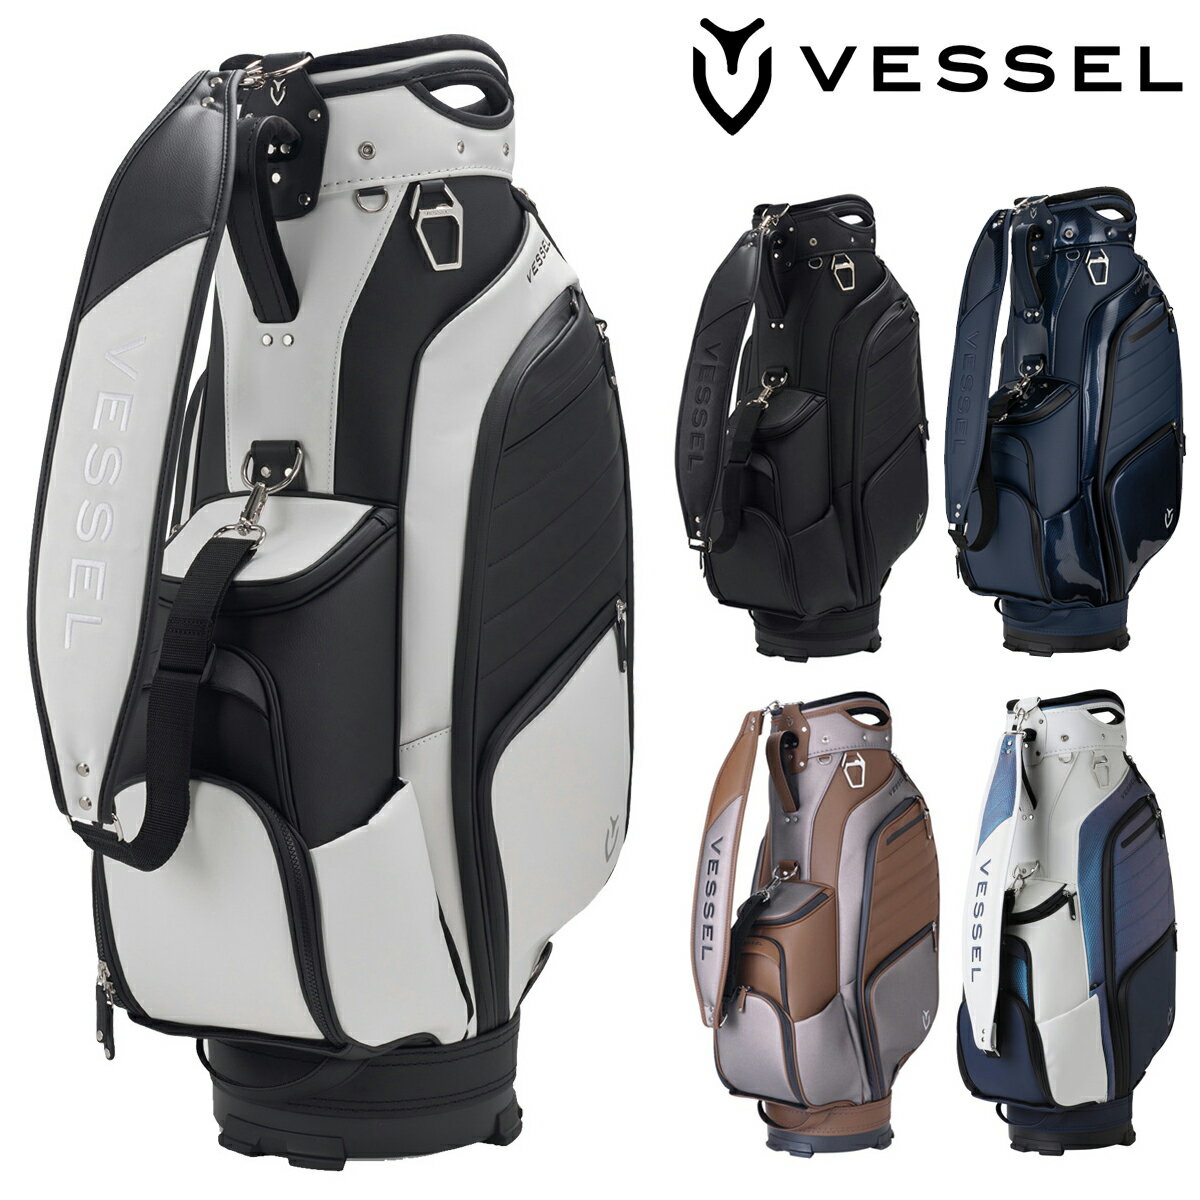 VESSEL <strong>ベゼル</strong>正規品 APX Staff プレミアムカートバッグ (<strong>キャディバッグ</strong>) 「 8730120 」 【あす楽対応】